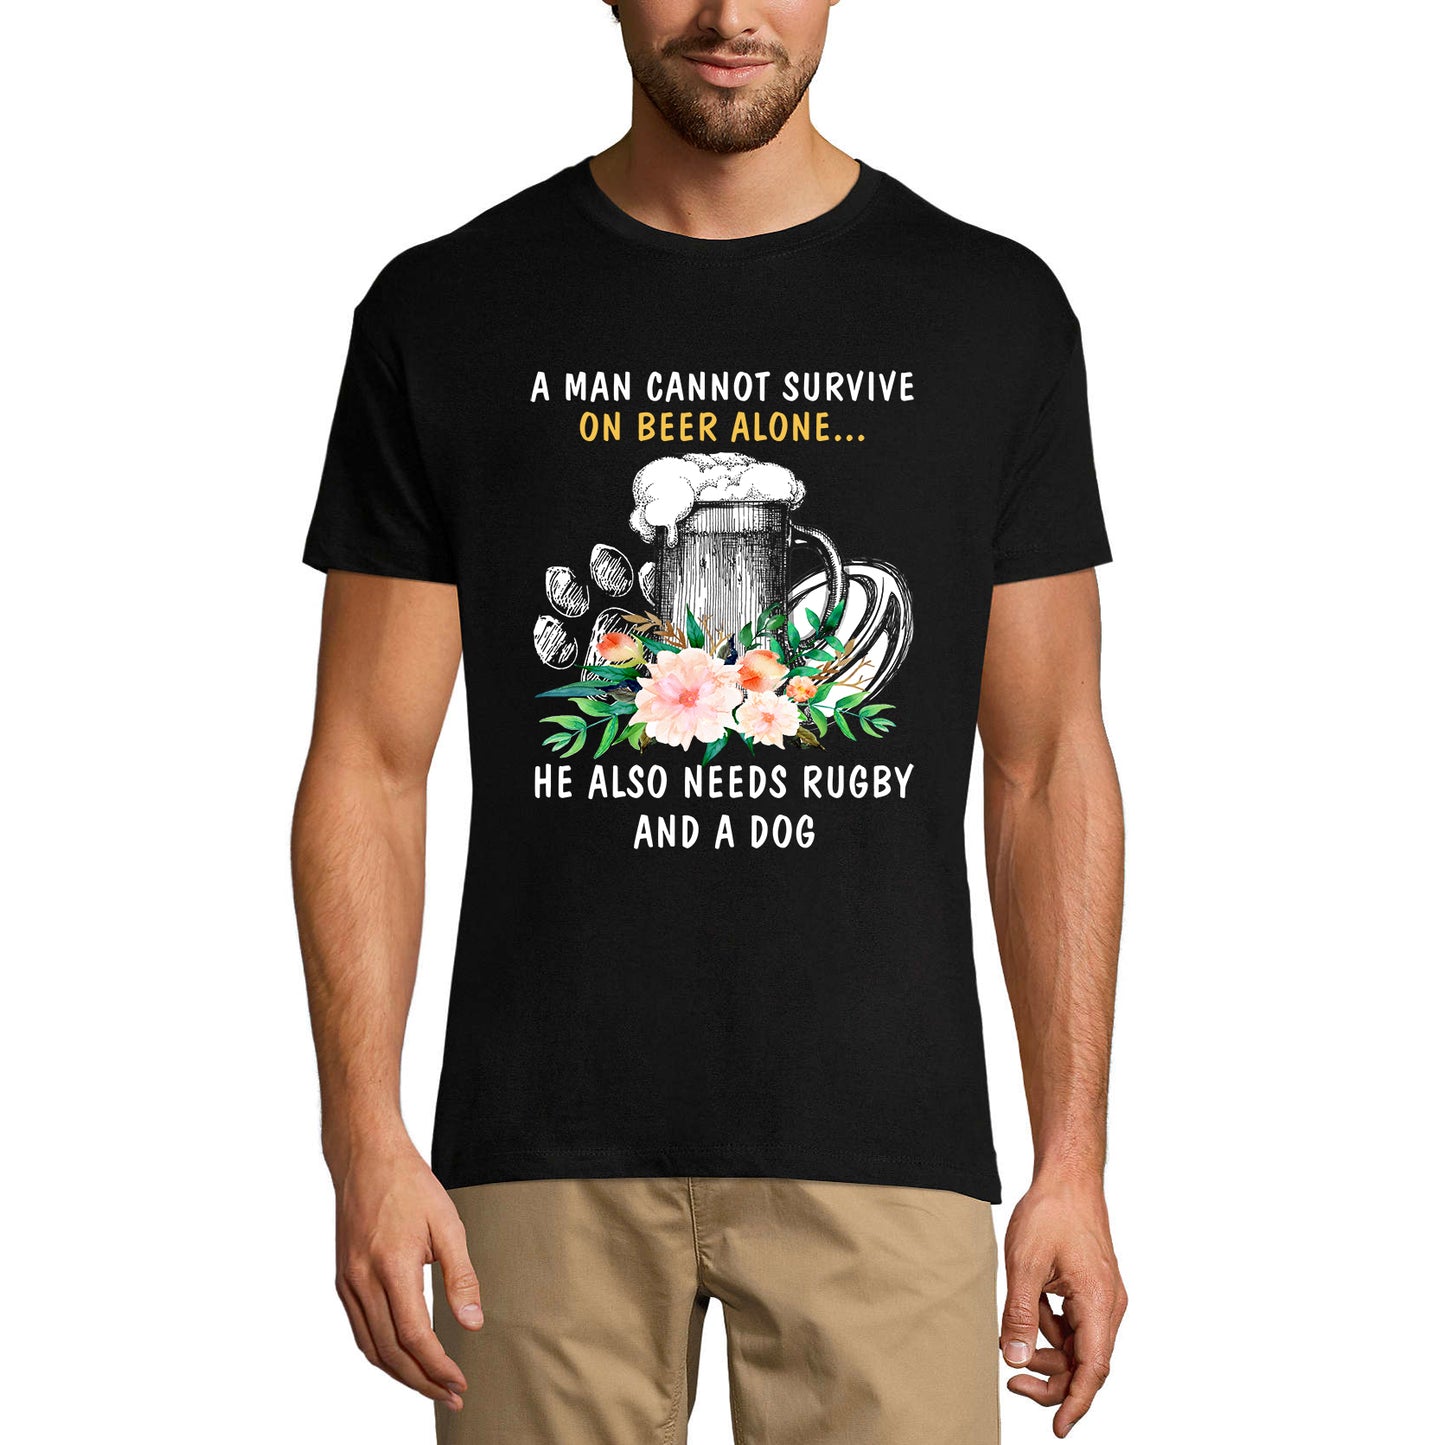 ULTRABASIC Men's T-Shirt Man Cannot Survive on Beer Alone He Also Needs Rugby and Dog - Saying Beer Lover Tee Shirt